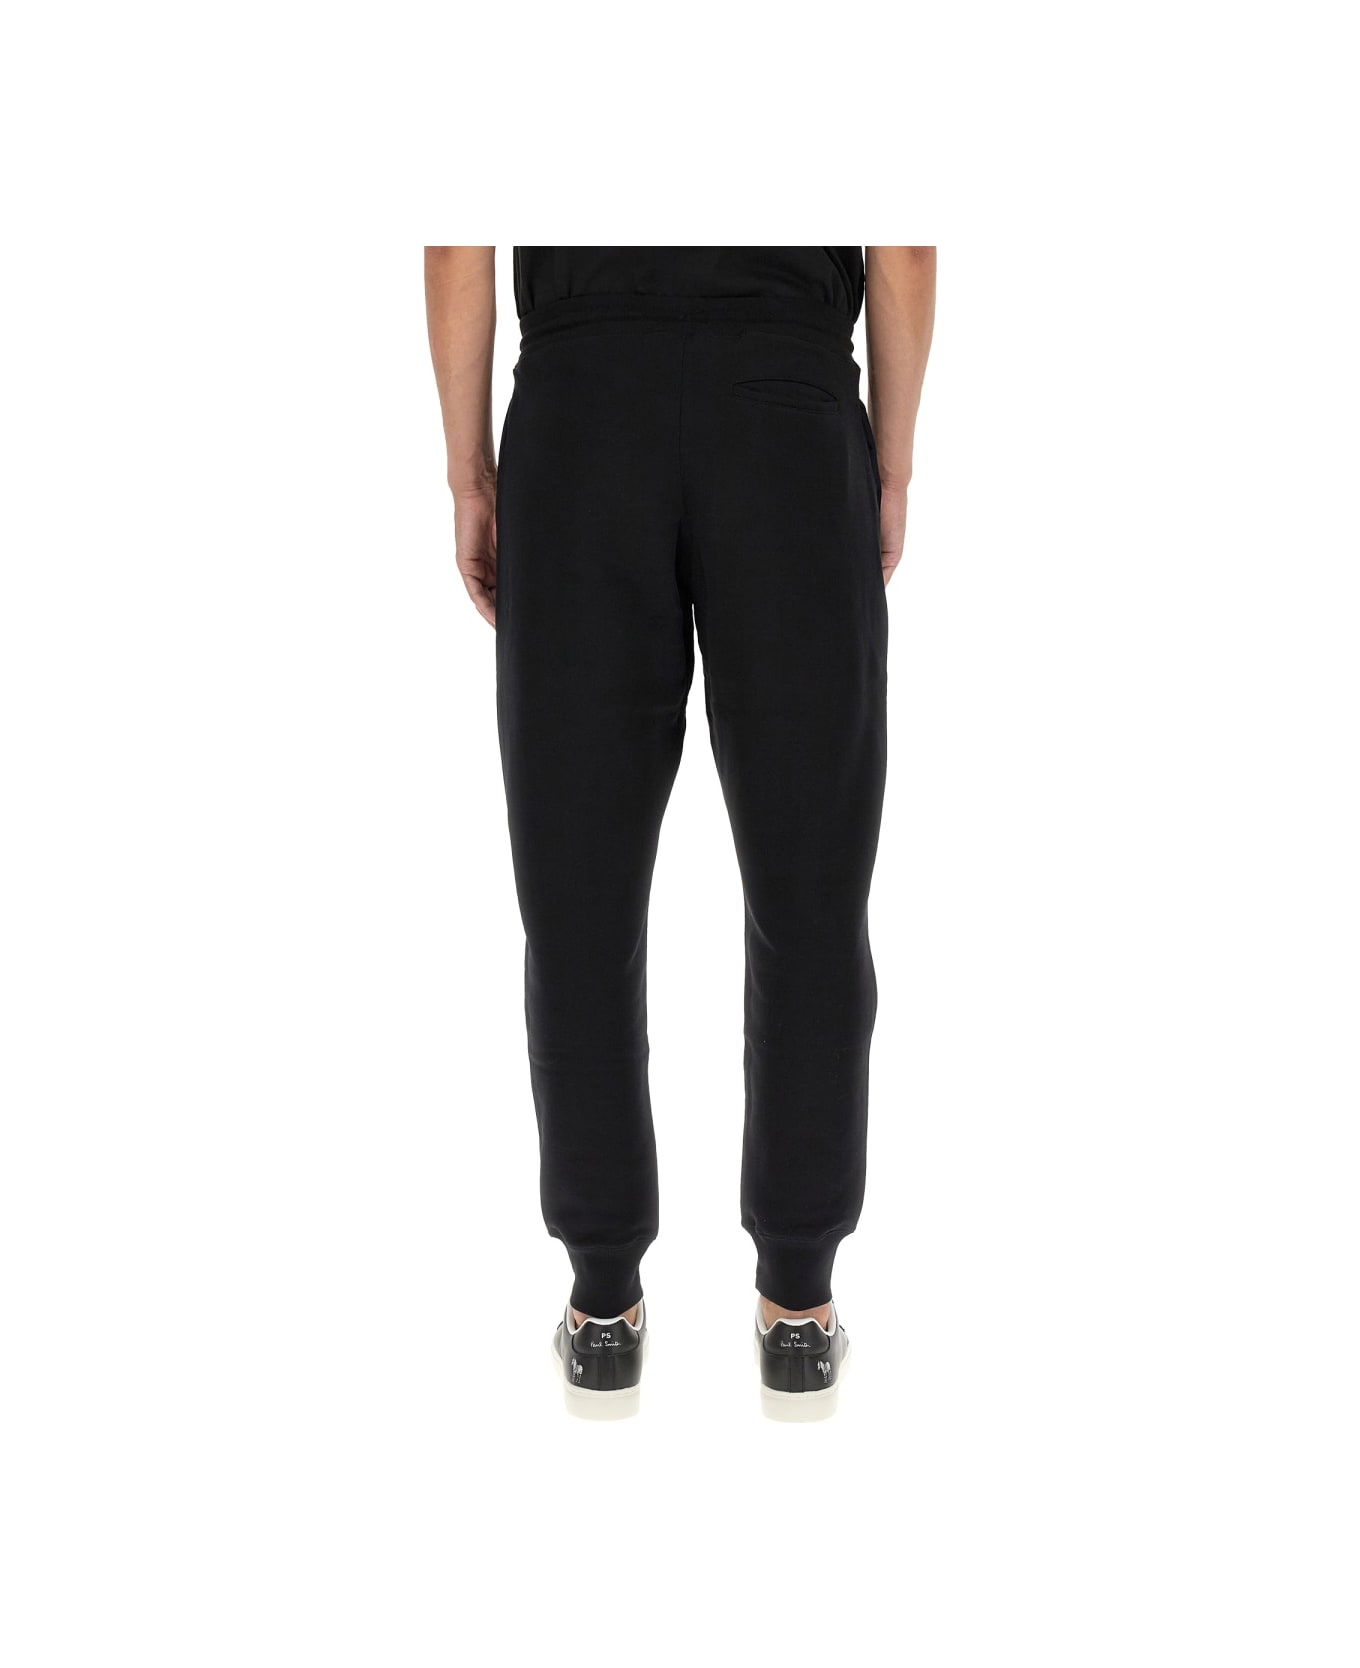 PS by Paul Smith Jogging Pants - BLACK